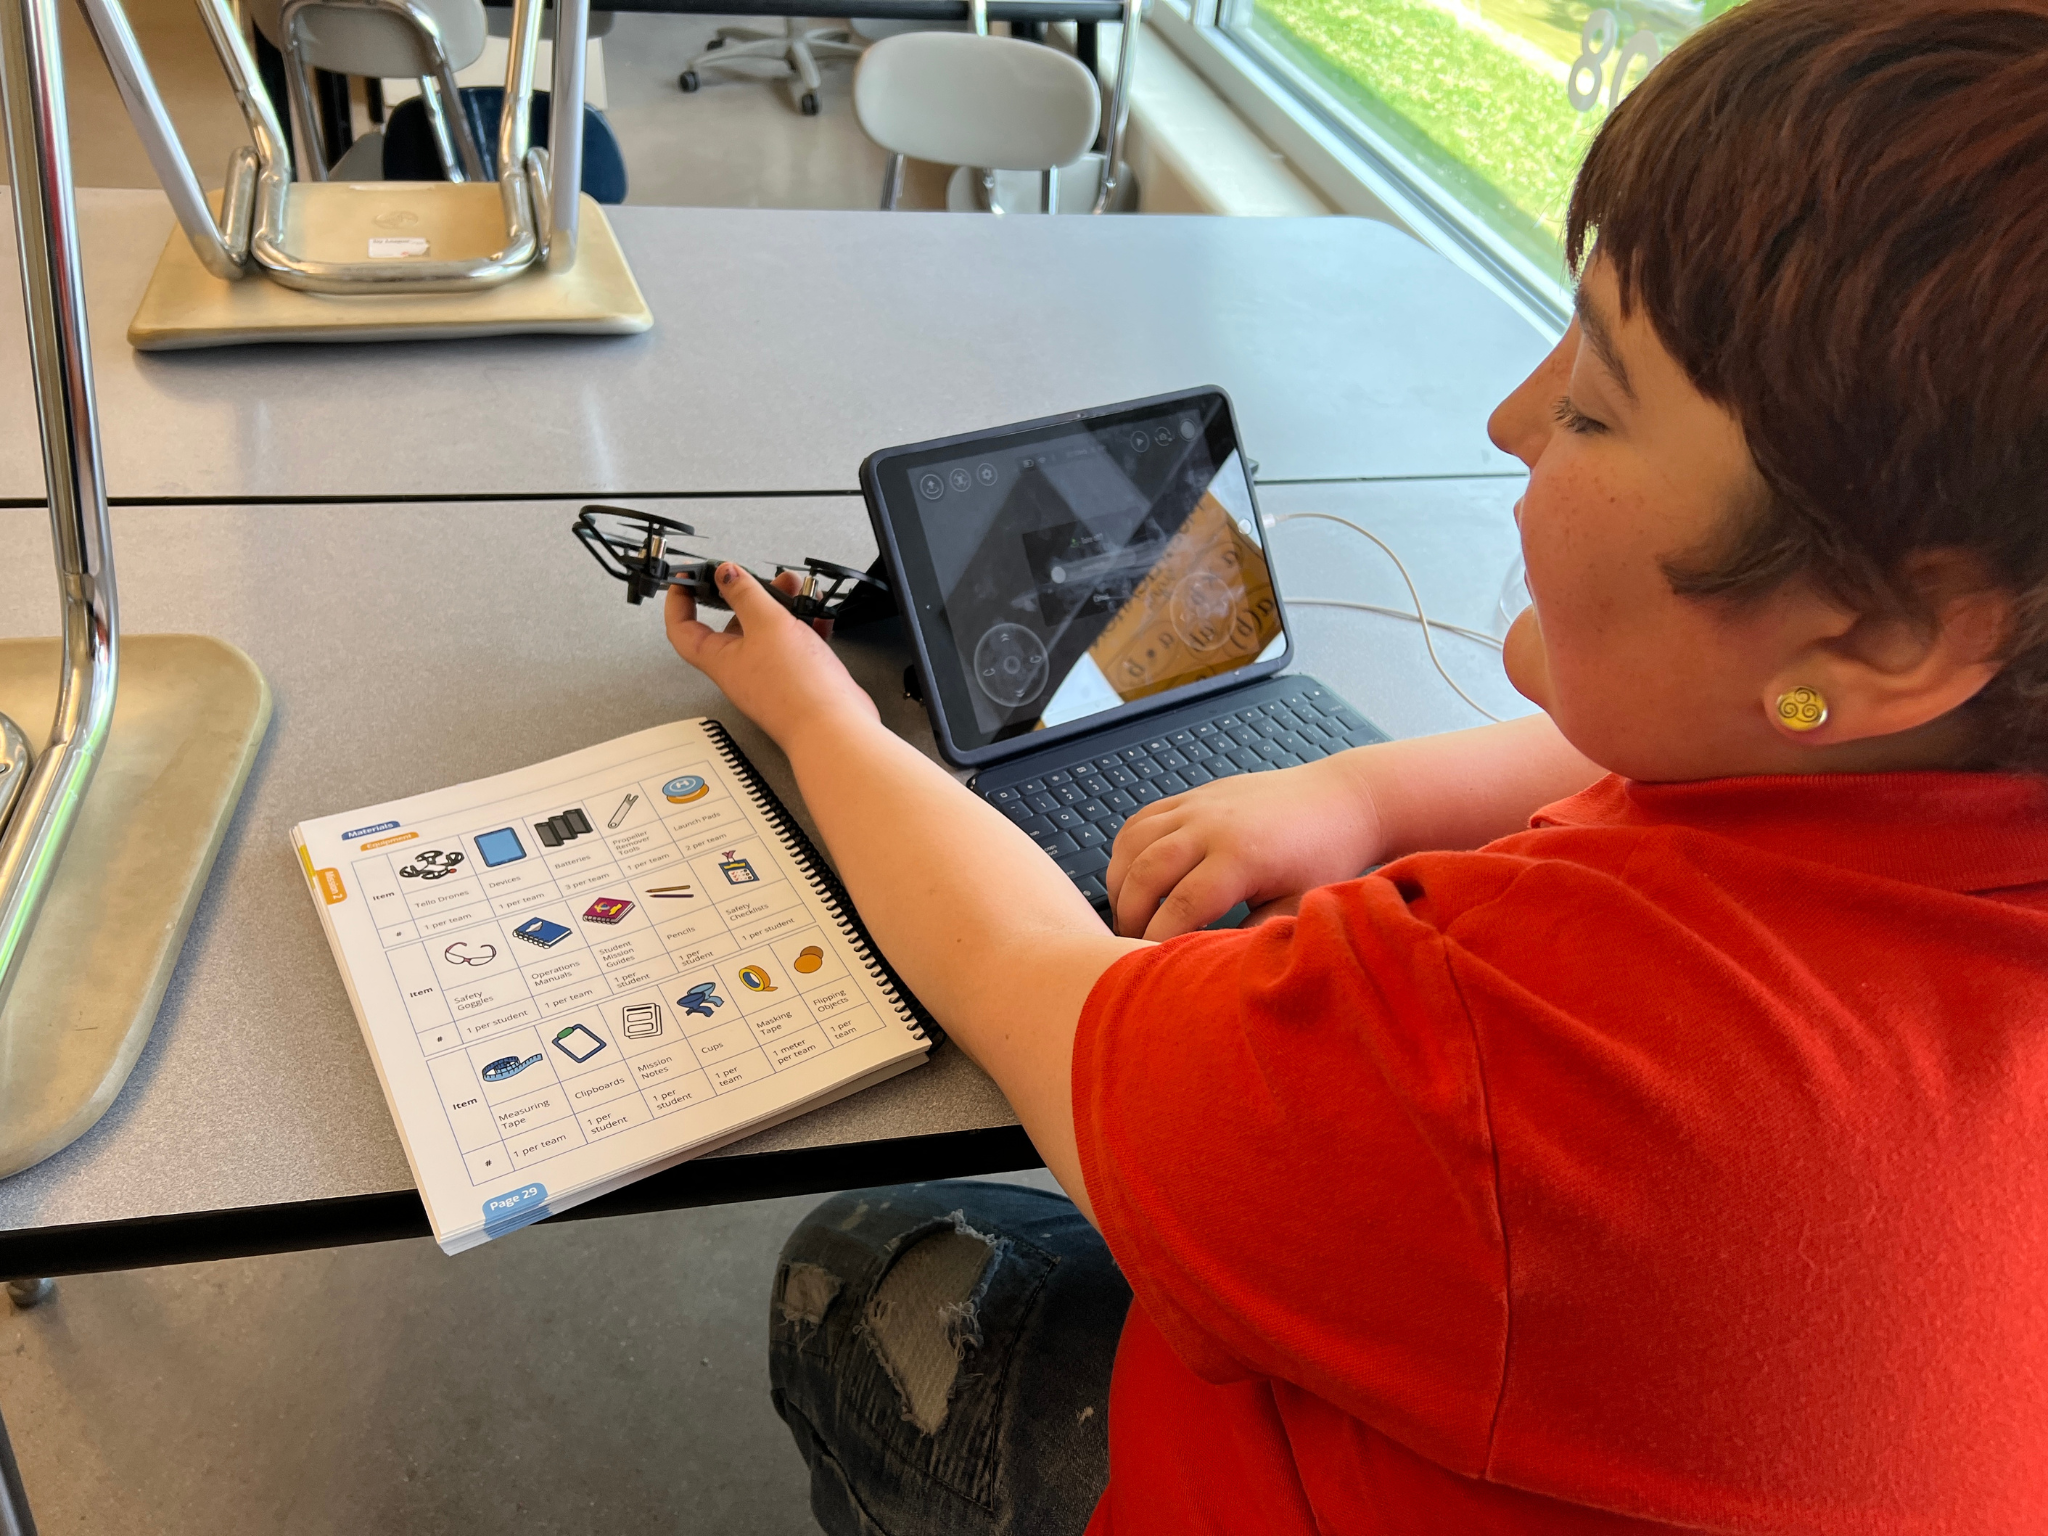 8 Ways Drone Technology Provides Unique and Interesting Ways to Explore Science in 4th Grade.